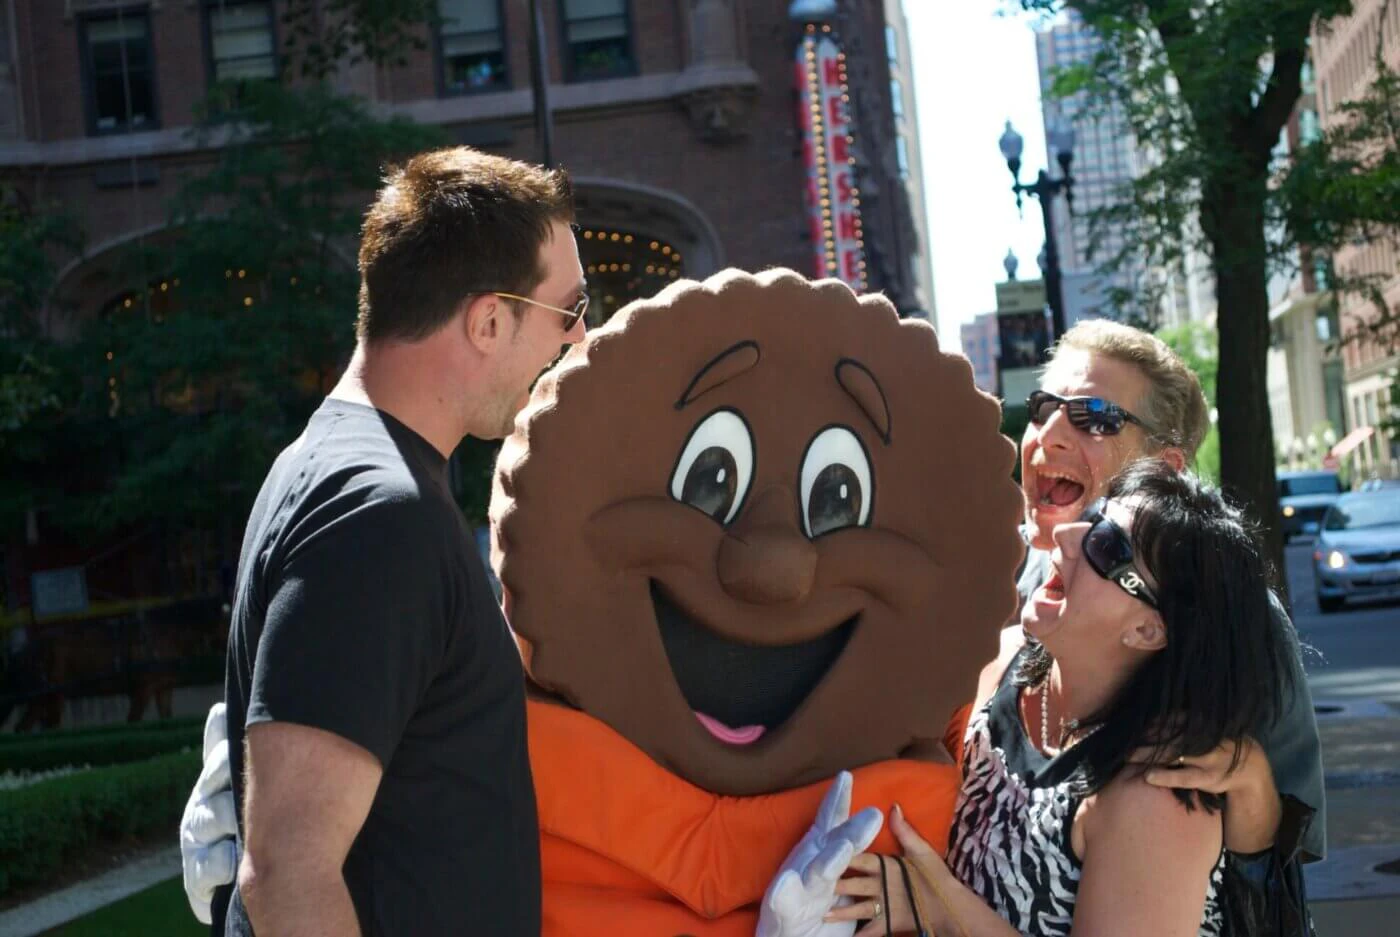 A Reese's character in Hershey, Pa. (Photo: Nicole Yeary/Creative Commons)